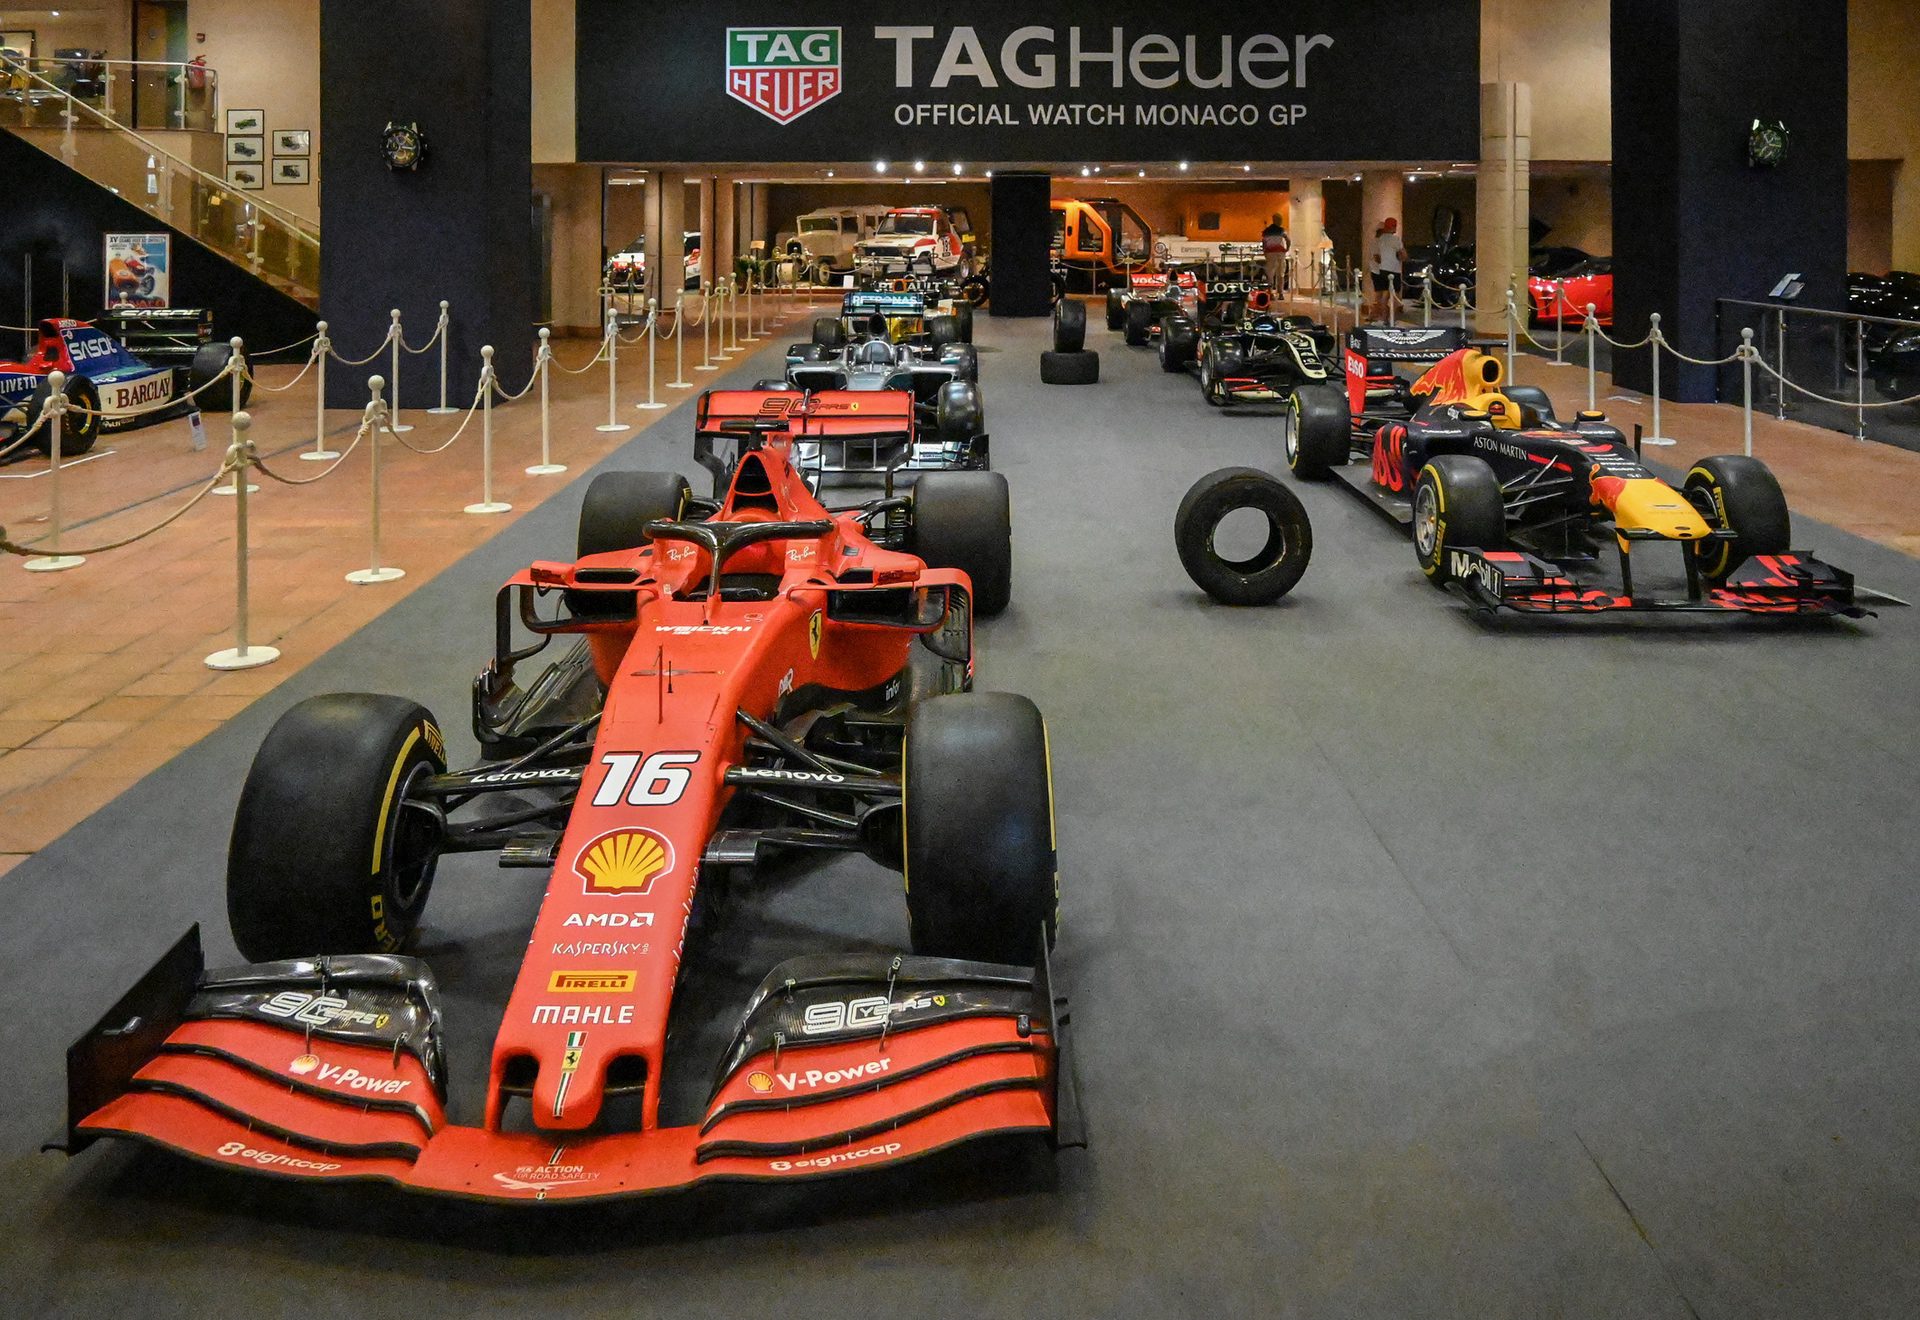 Race cars on display in Prince of Monaco's Royal Auto Collection